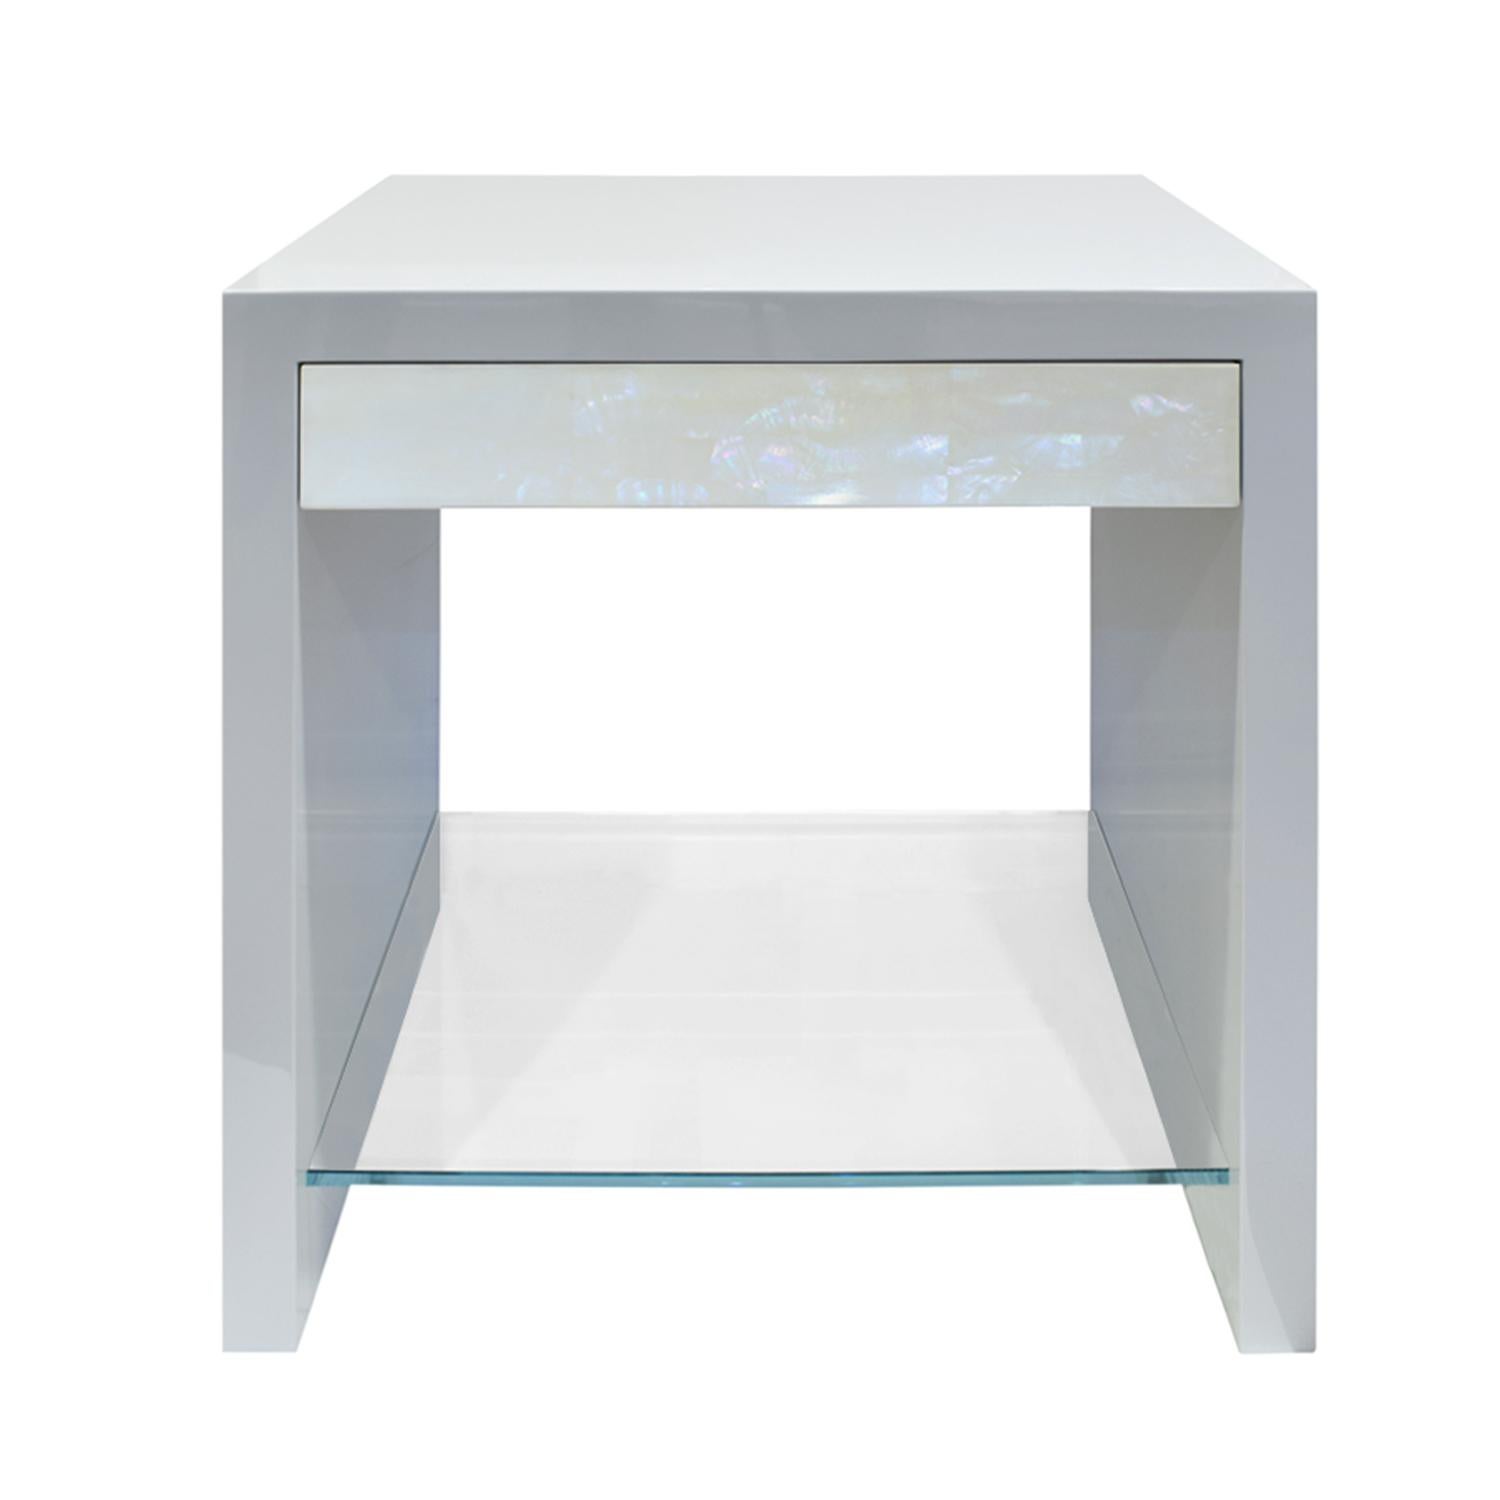 Pair of pearl front bedside tables, mirror lacquered in any color with drawer in mother of pearl with glass shelf, by Evan Lobel for Lobel Originals. Shown in gray. These can be made in any color and in any size. Drawers are self closing.